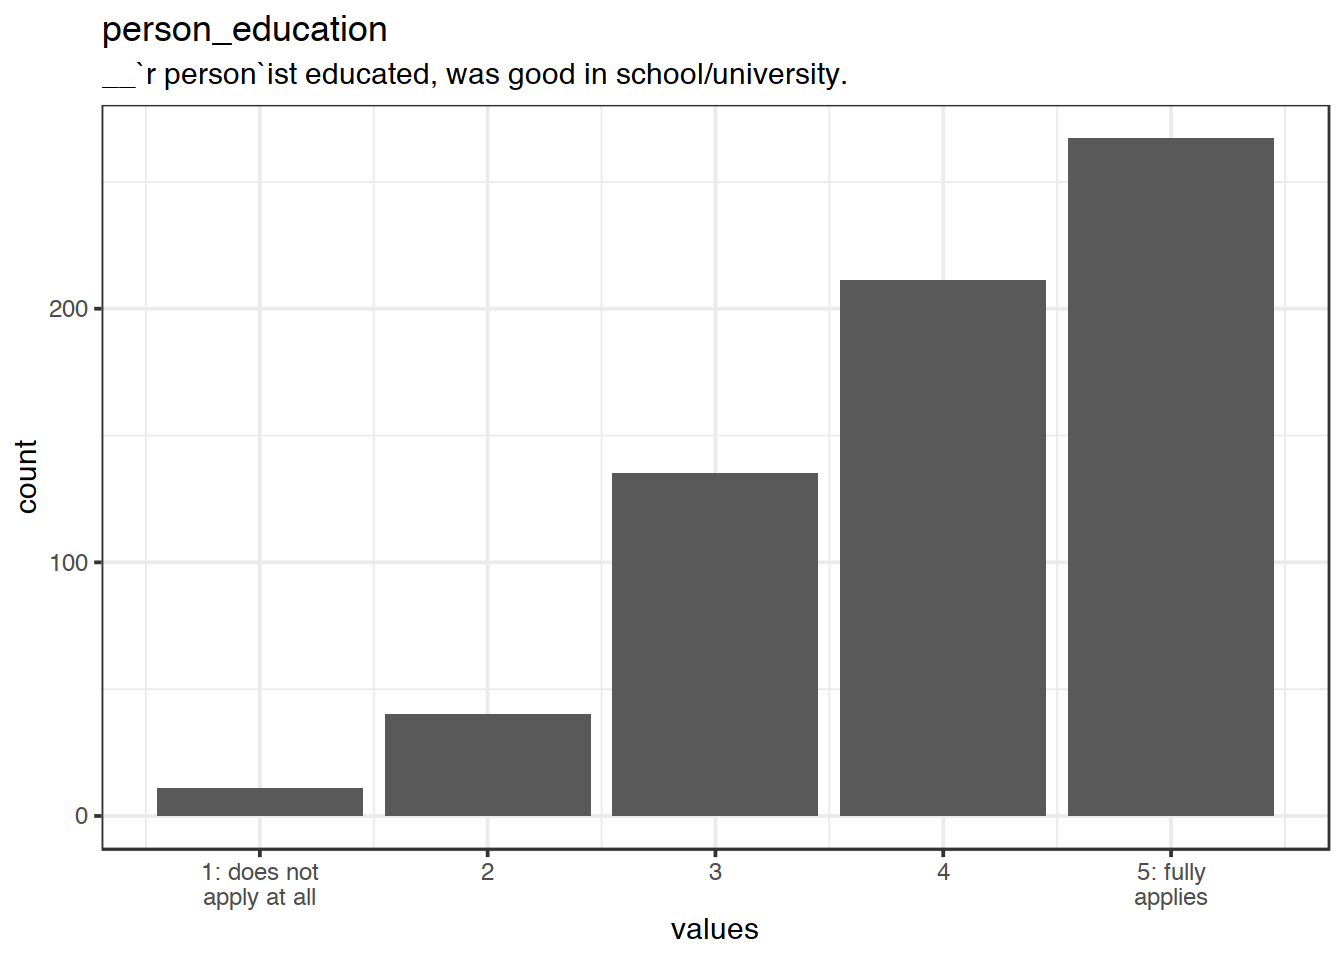 Distribution of values for person_education